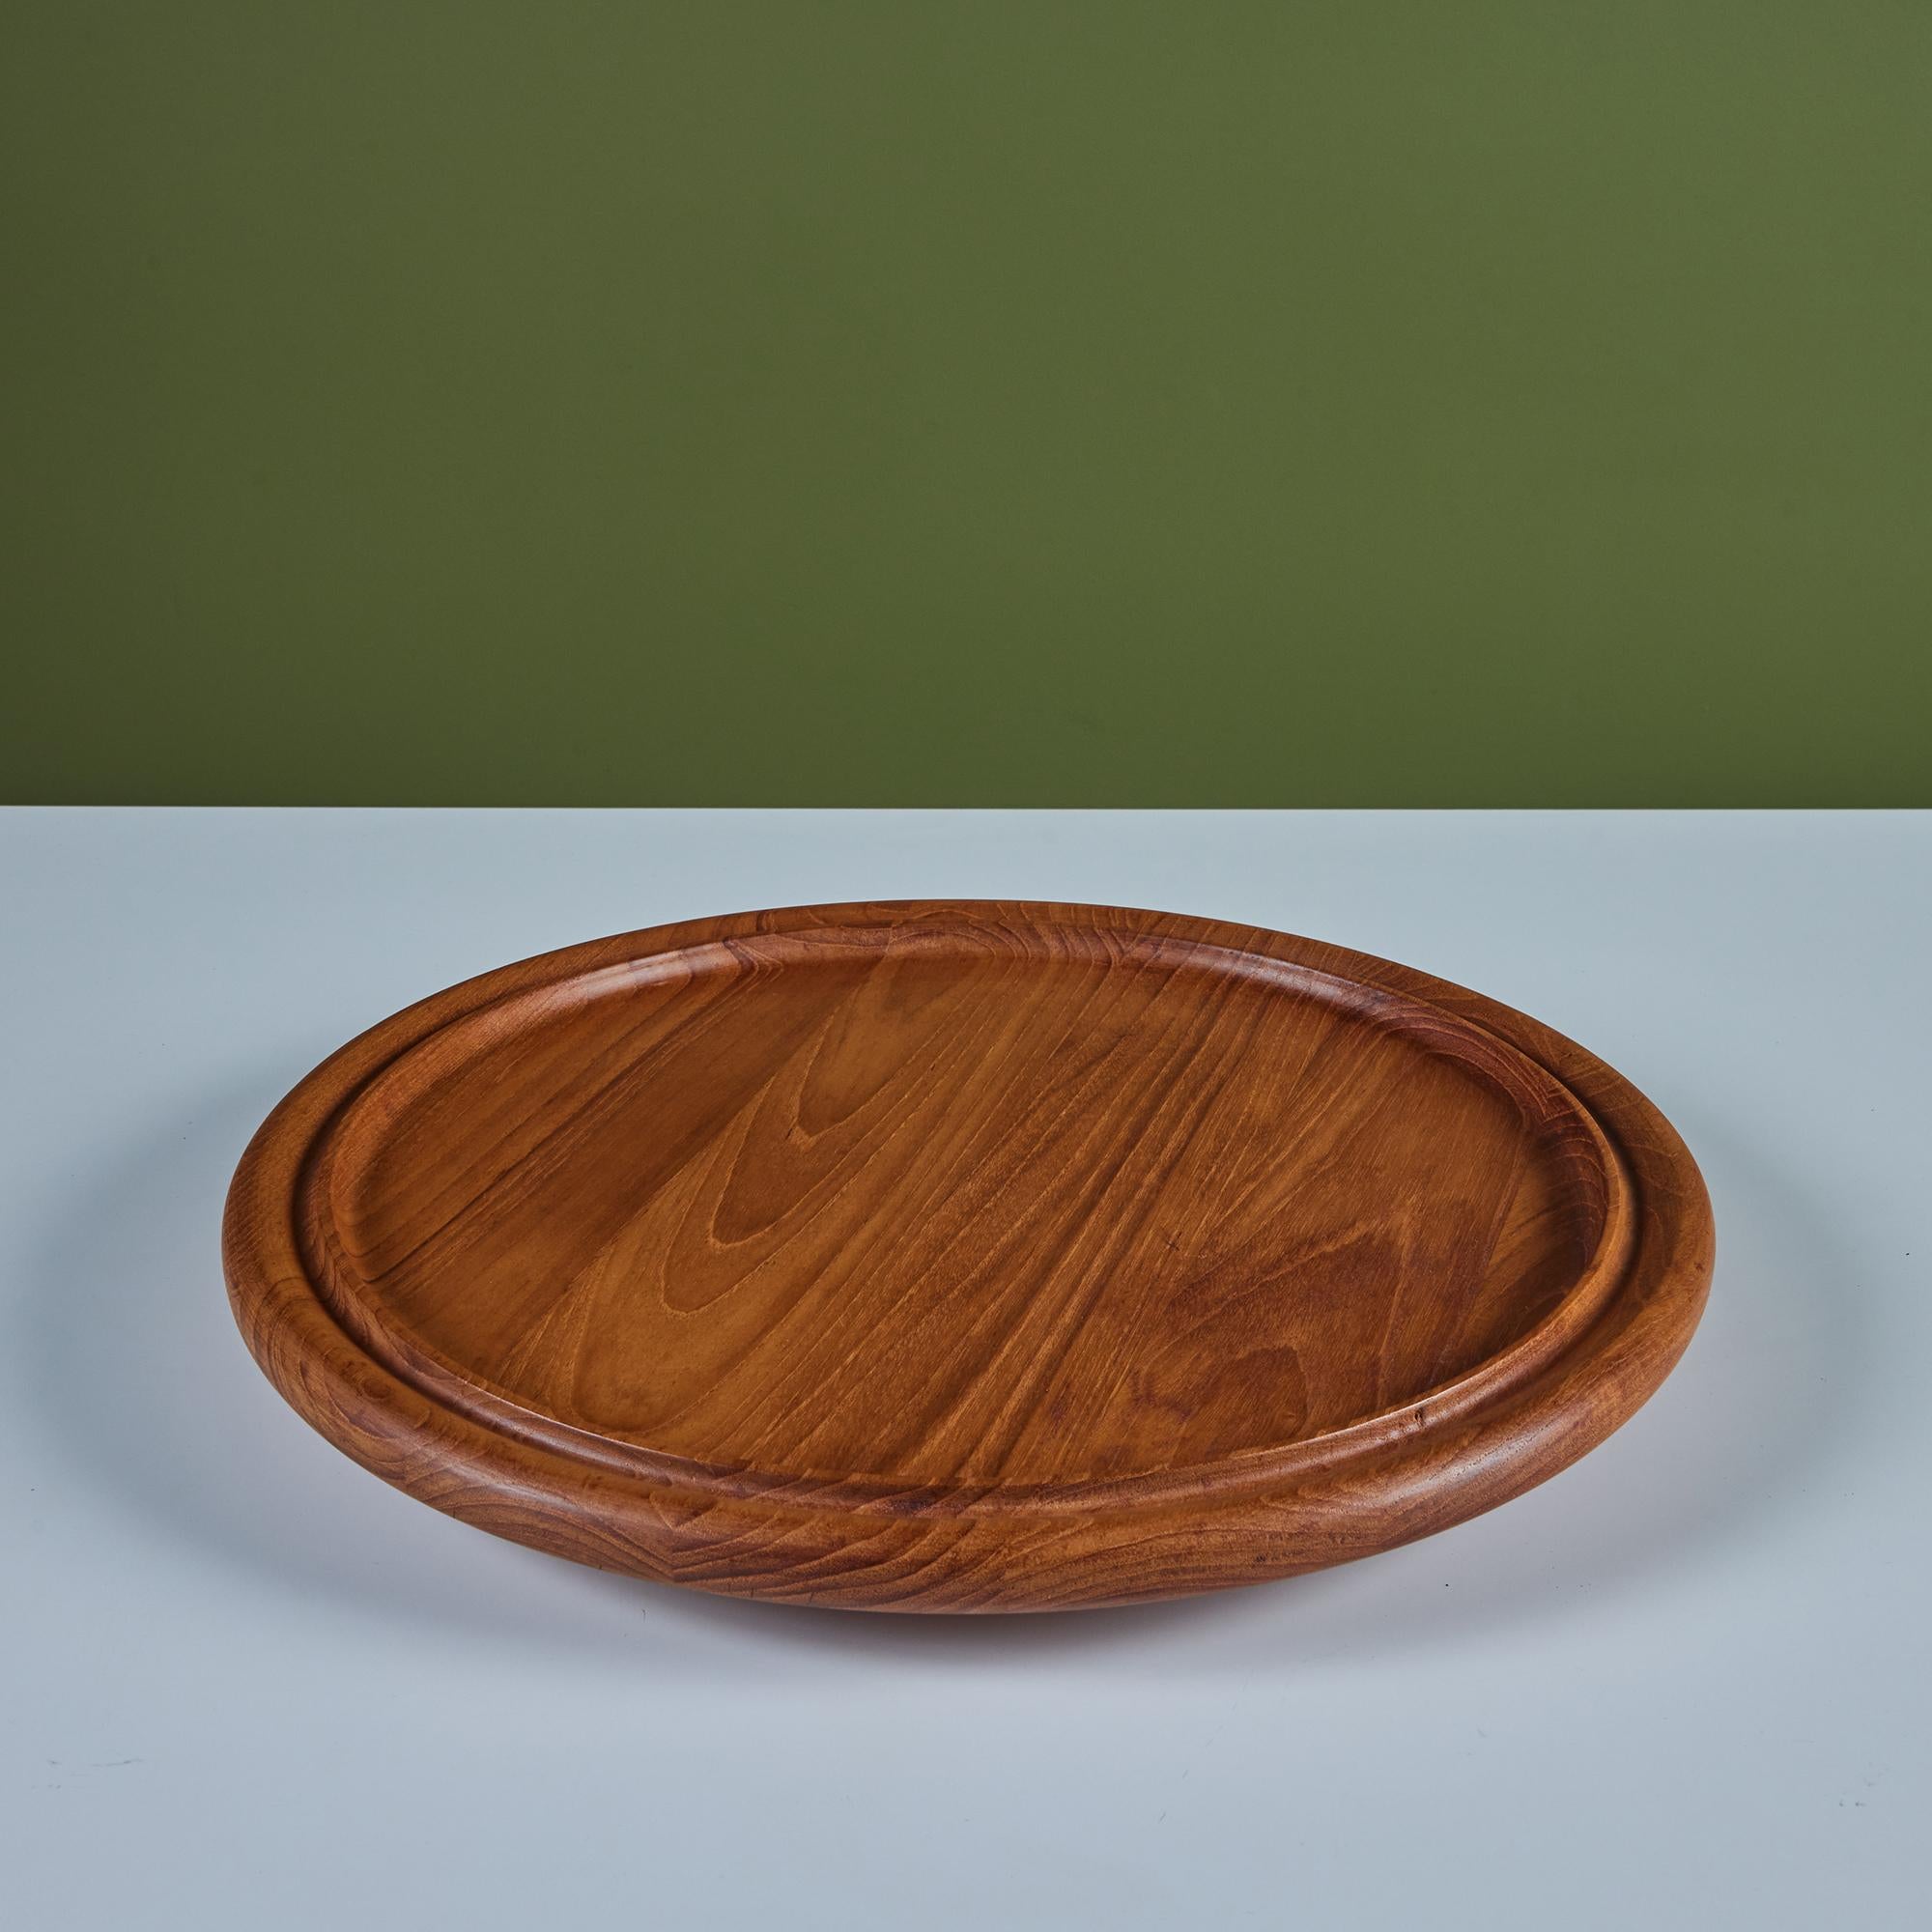 Dansk is one of the most beloved and celebrated makers of Mid-Century table and kitchenware; whether its their use of teak or enamel, their designs endure even 60 years later, making their pieces highly sought after and collectible. This round tray